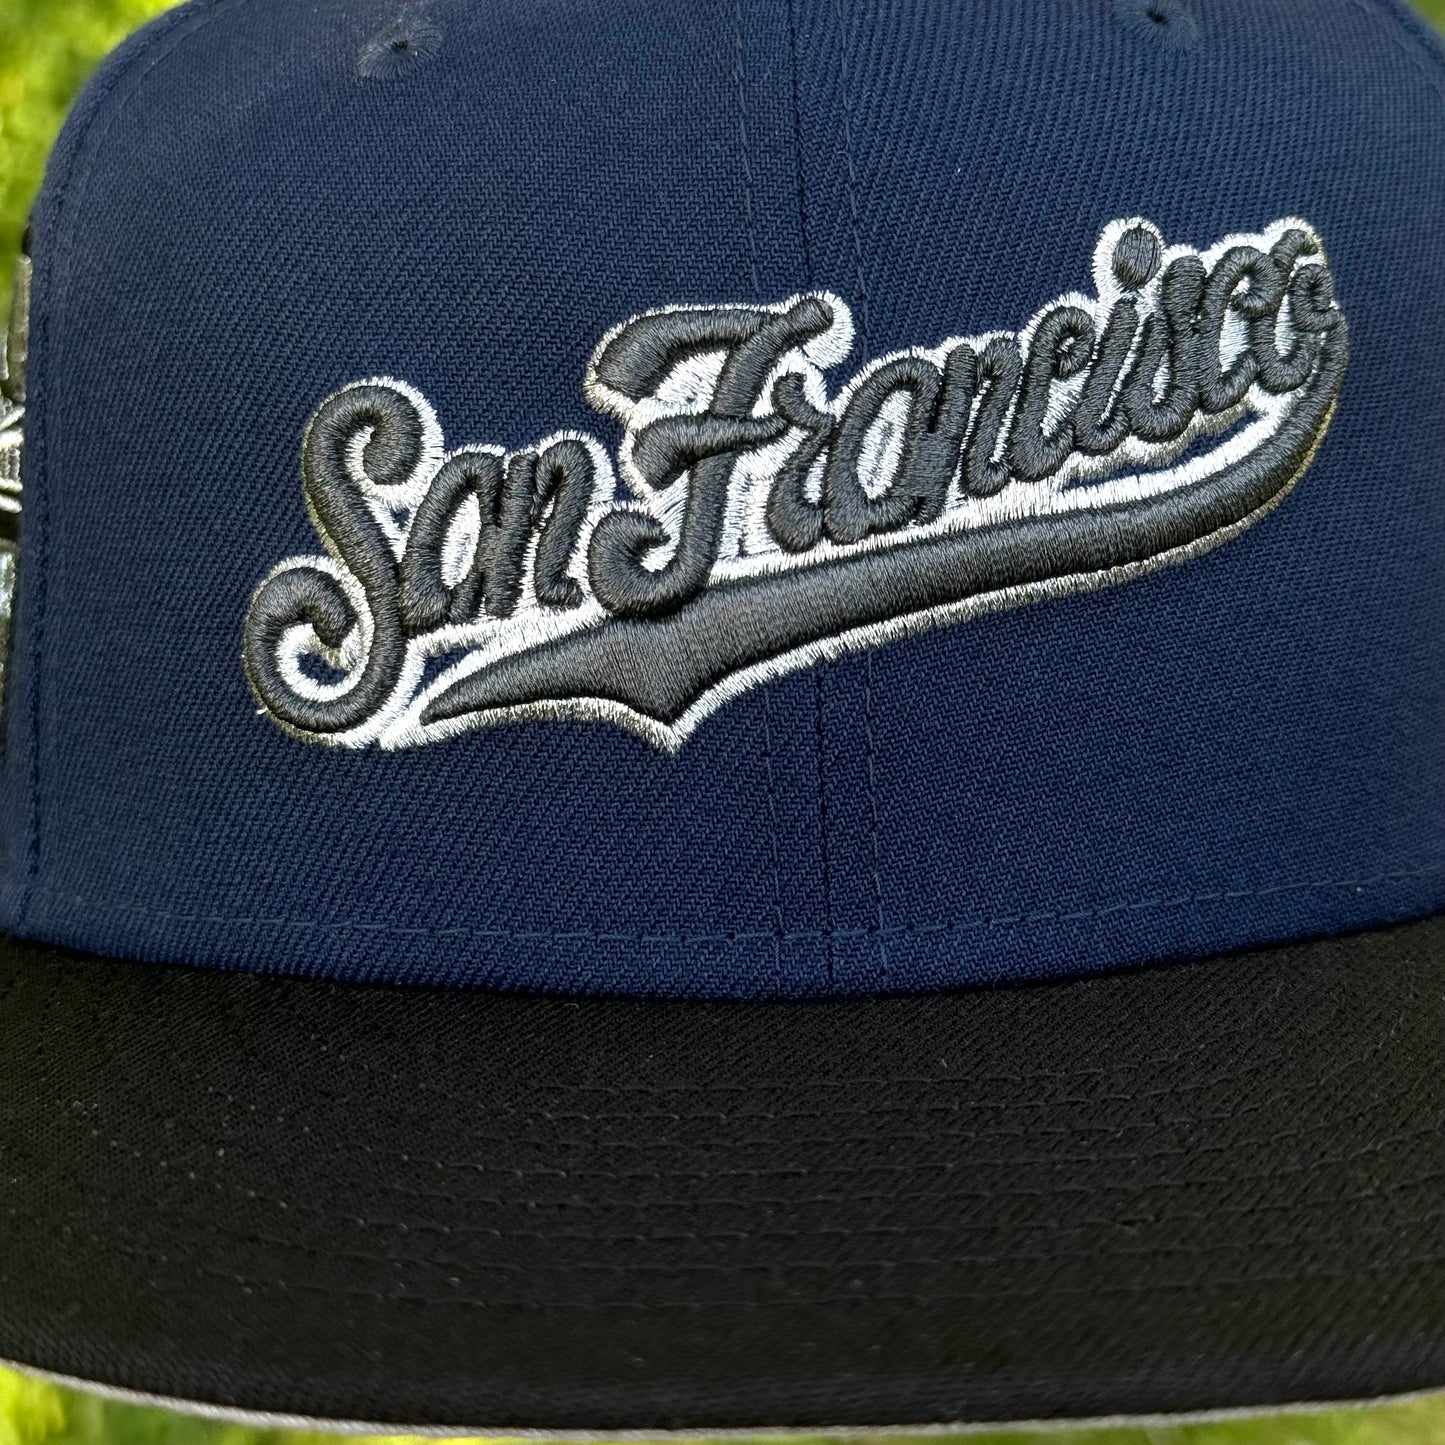 San Francisco Giants 2007 All Star Game Side Patch Fitted Hat New Era 5950 (Navy Blue/Black/Silver/Metallic Pewter)